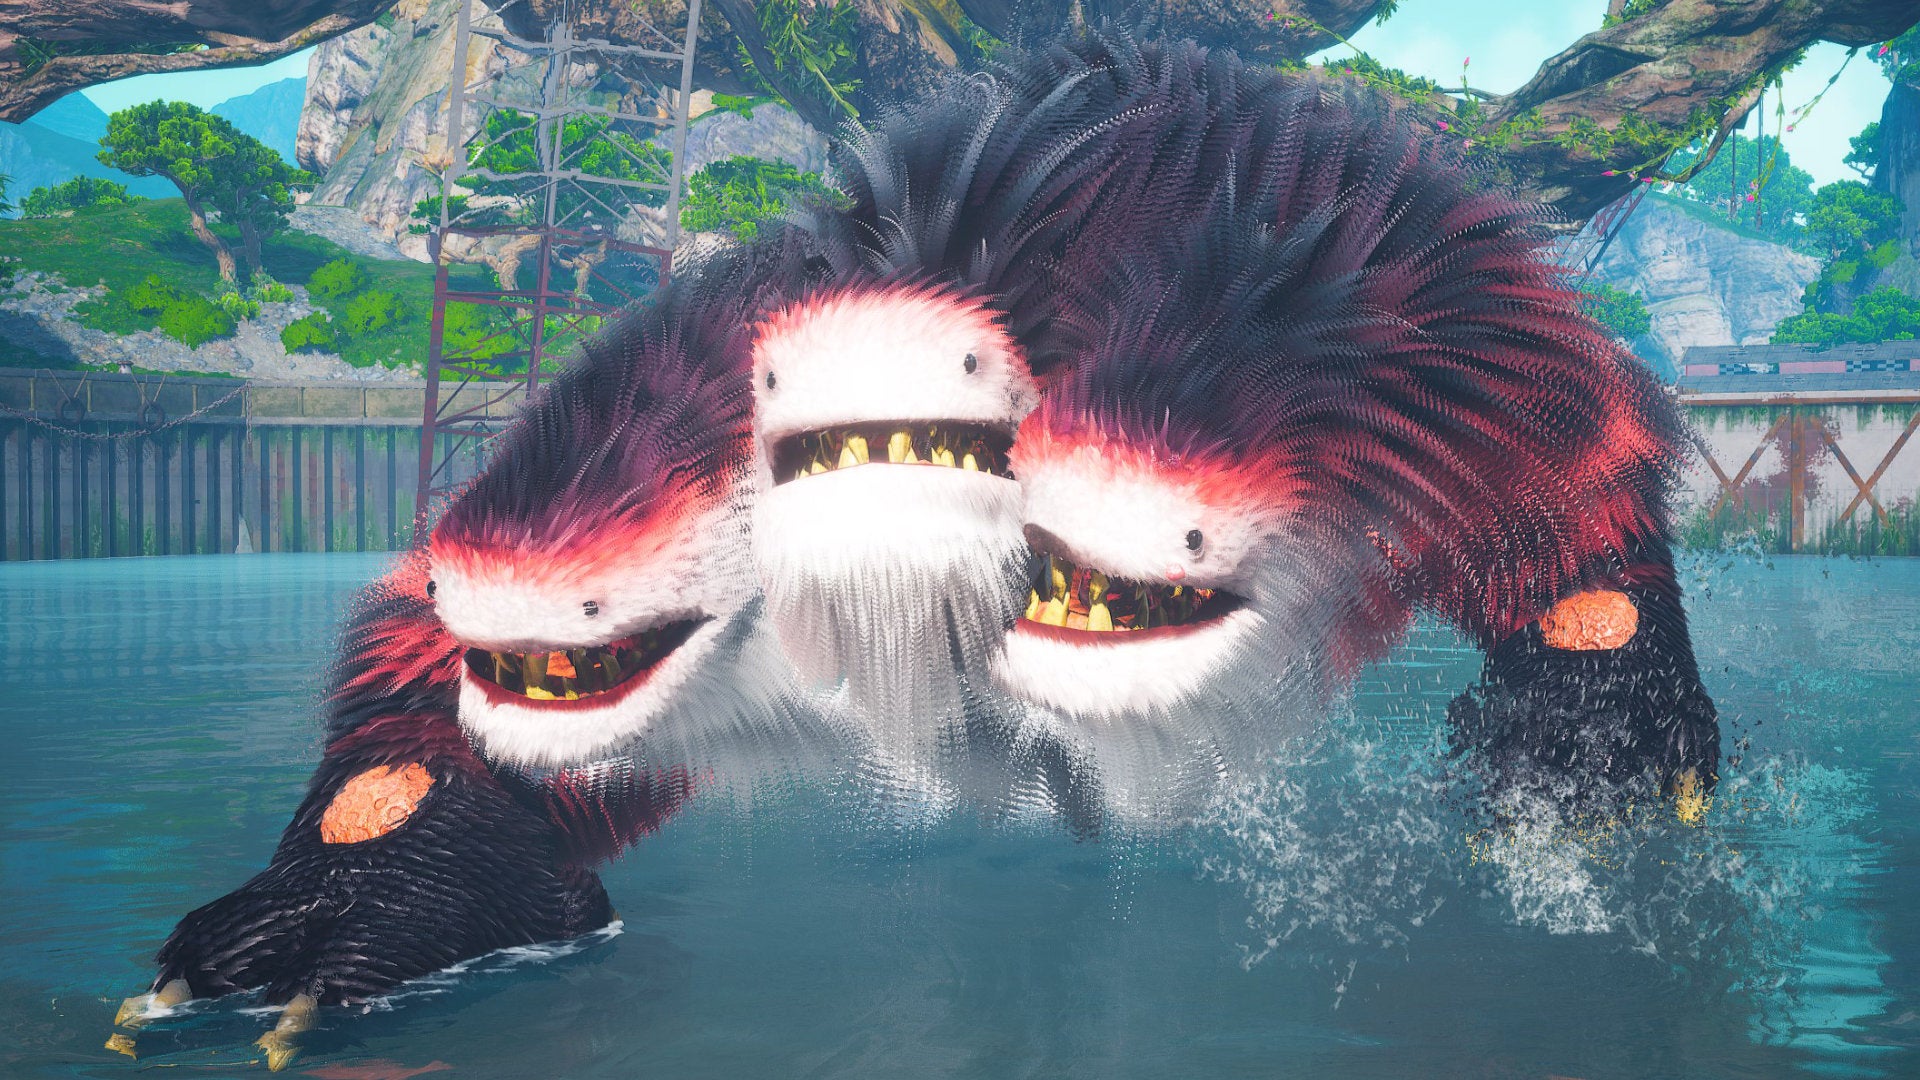 A Biomutant screenshot of the Porky Puff boss, during the water phase of the boss fight.